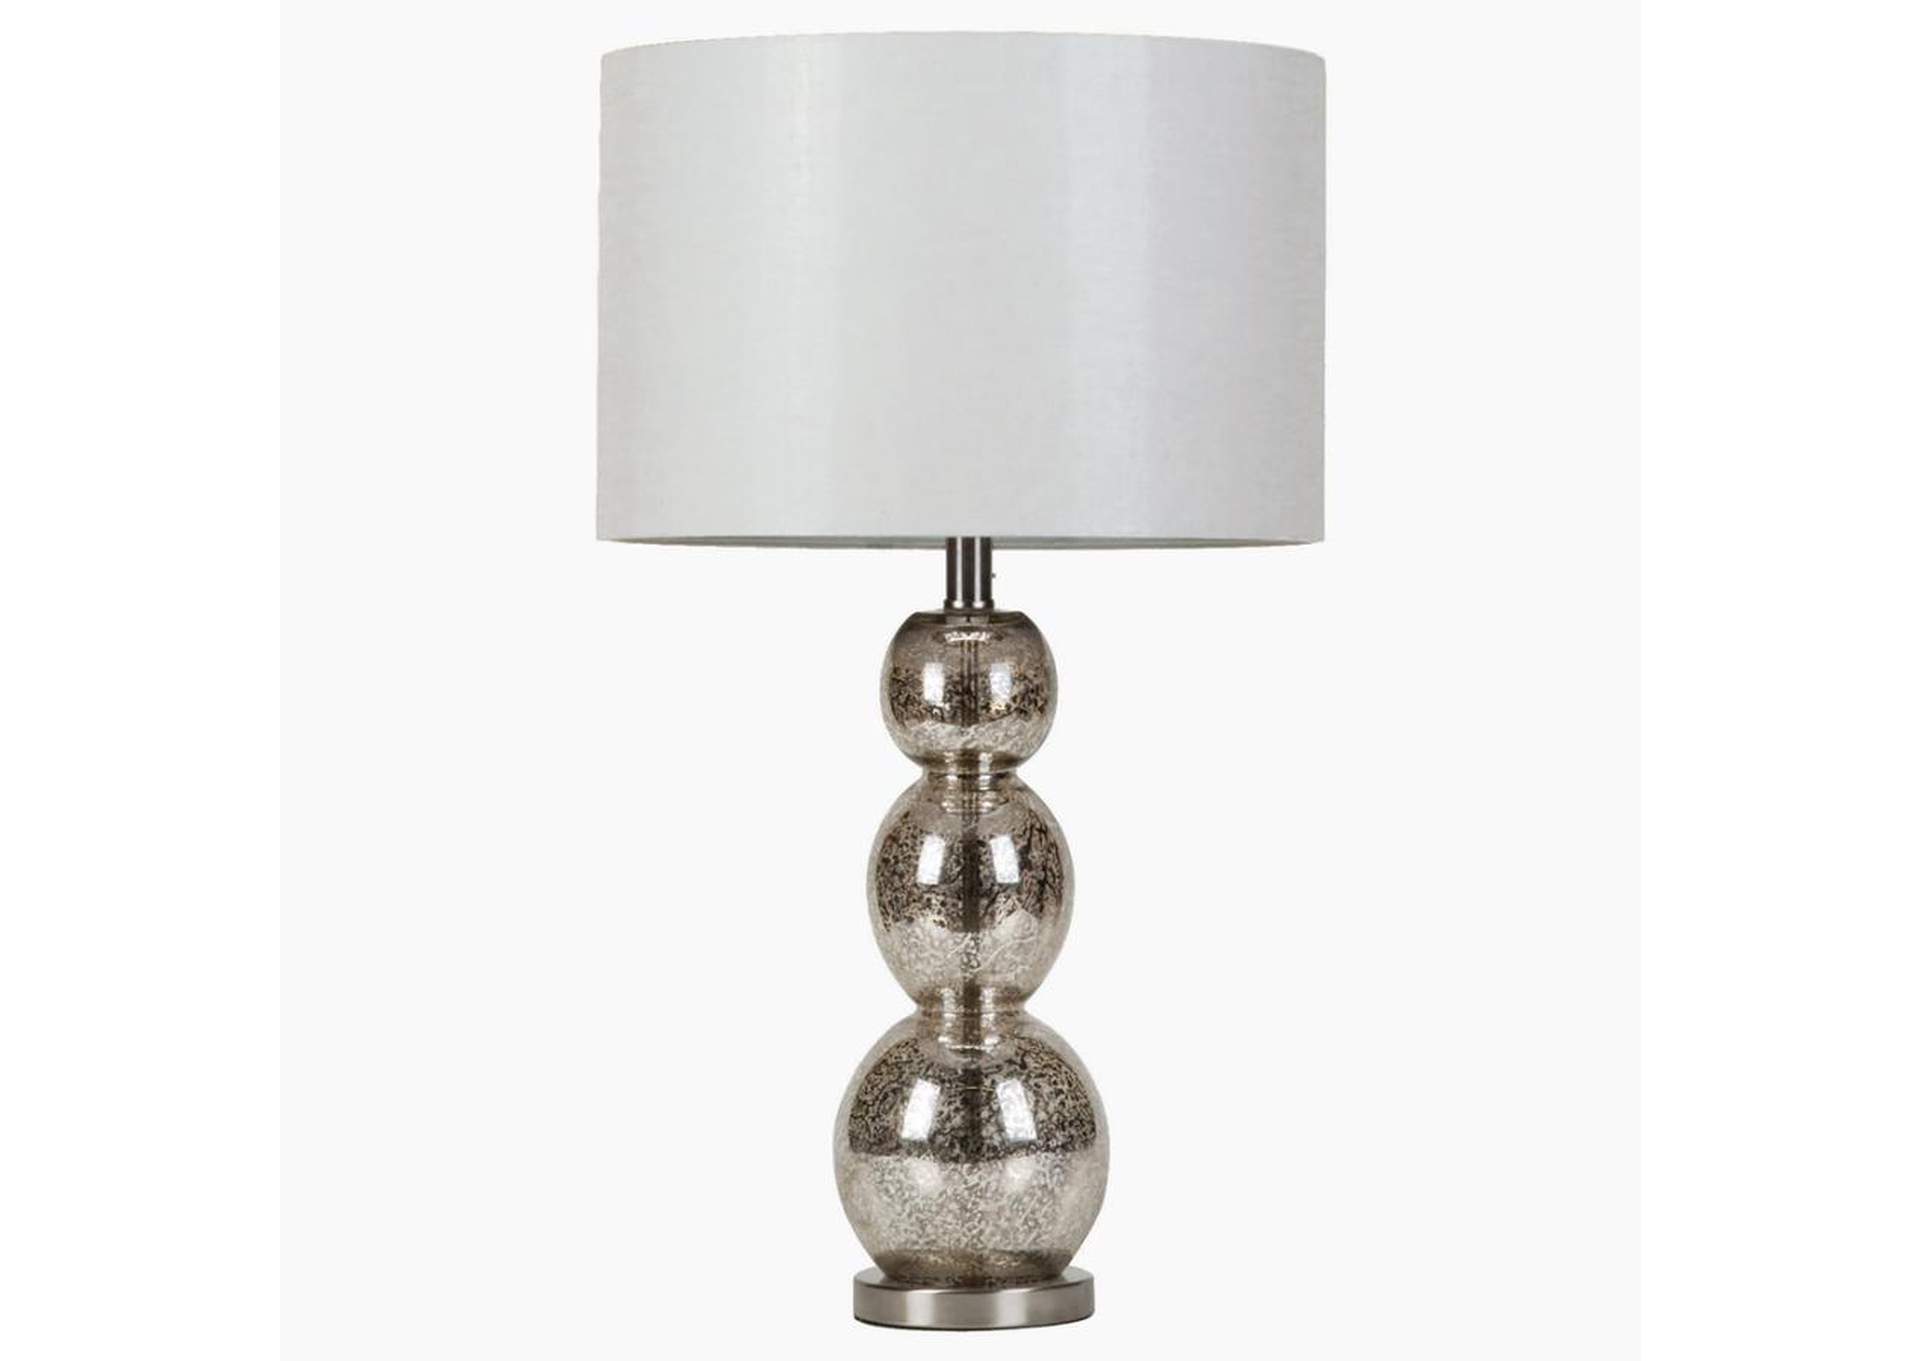 Drum Shade Table Lamp White and Antique Silver,Coaster Furniture